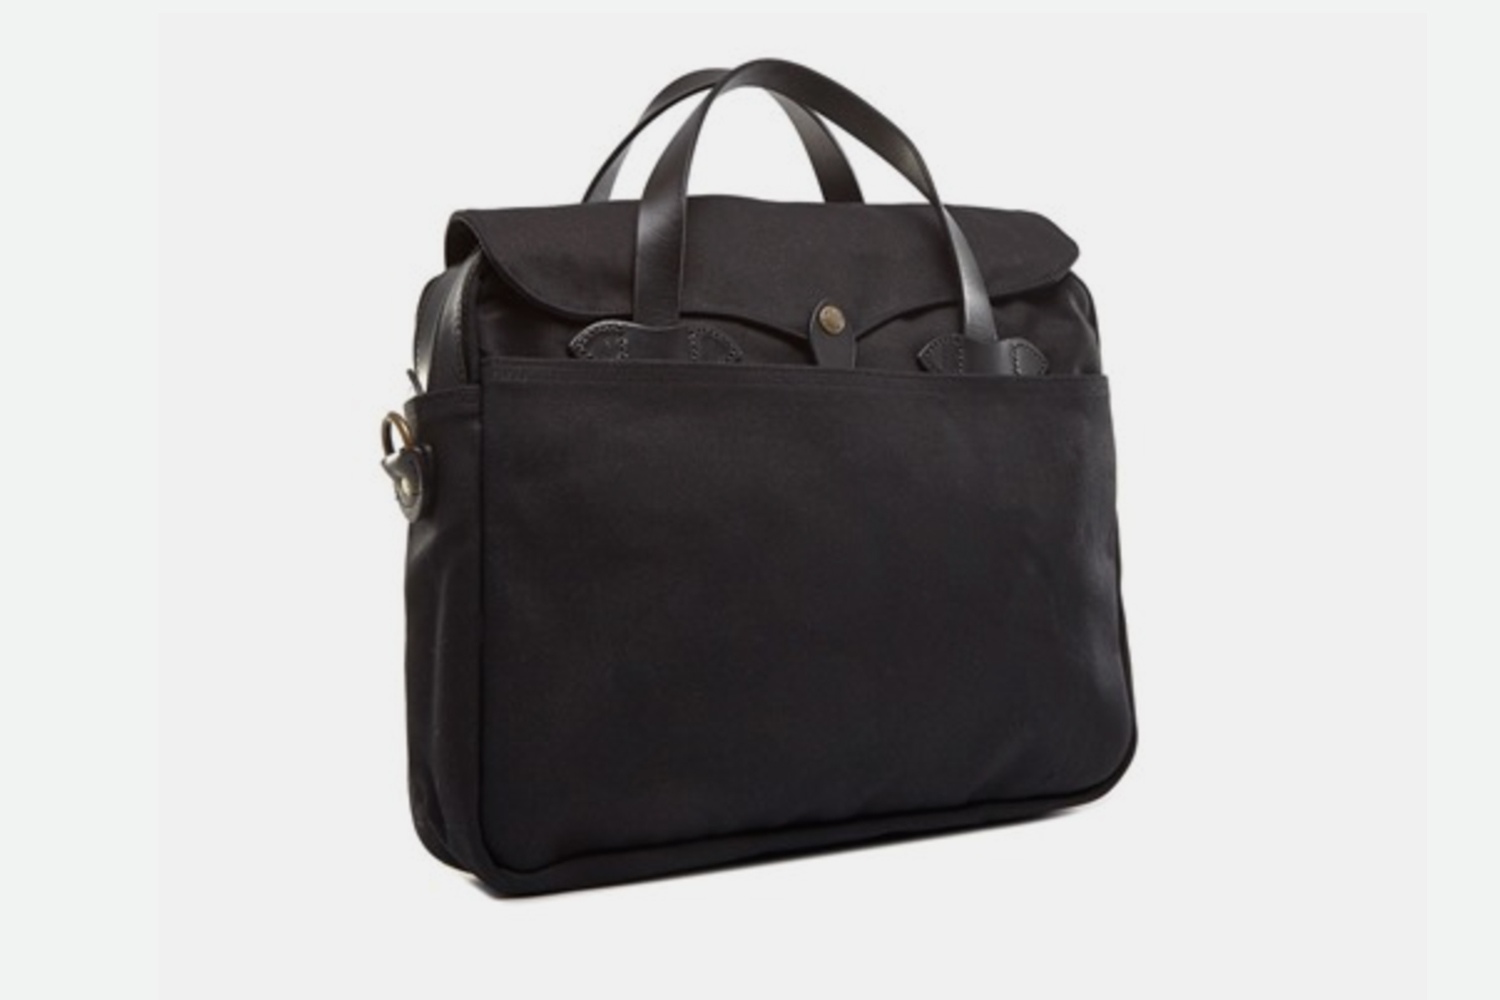 Deal: The Quintessential Filson Briefcase Is Currently Half Off